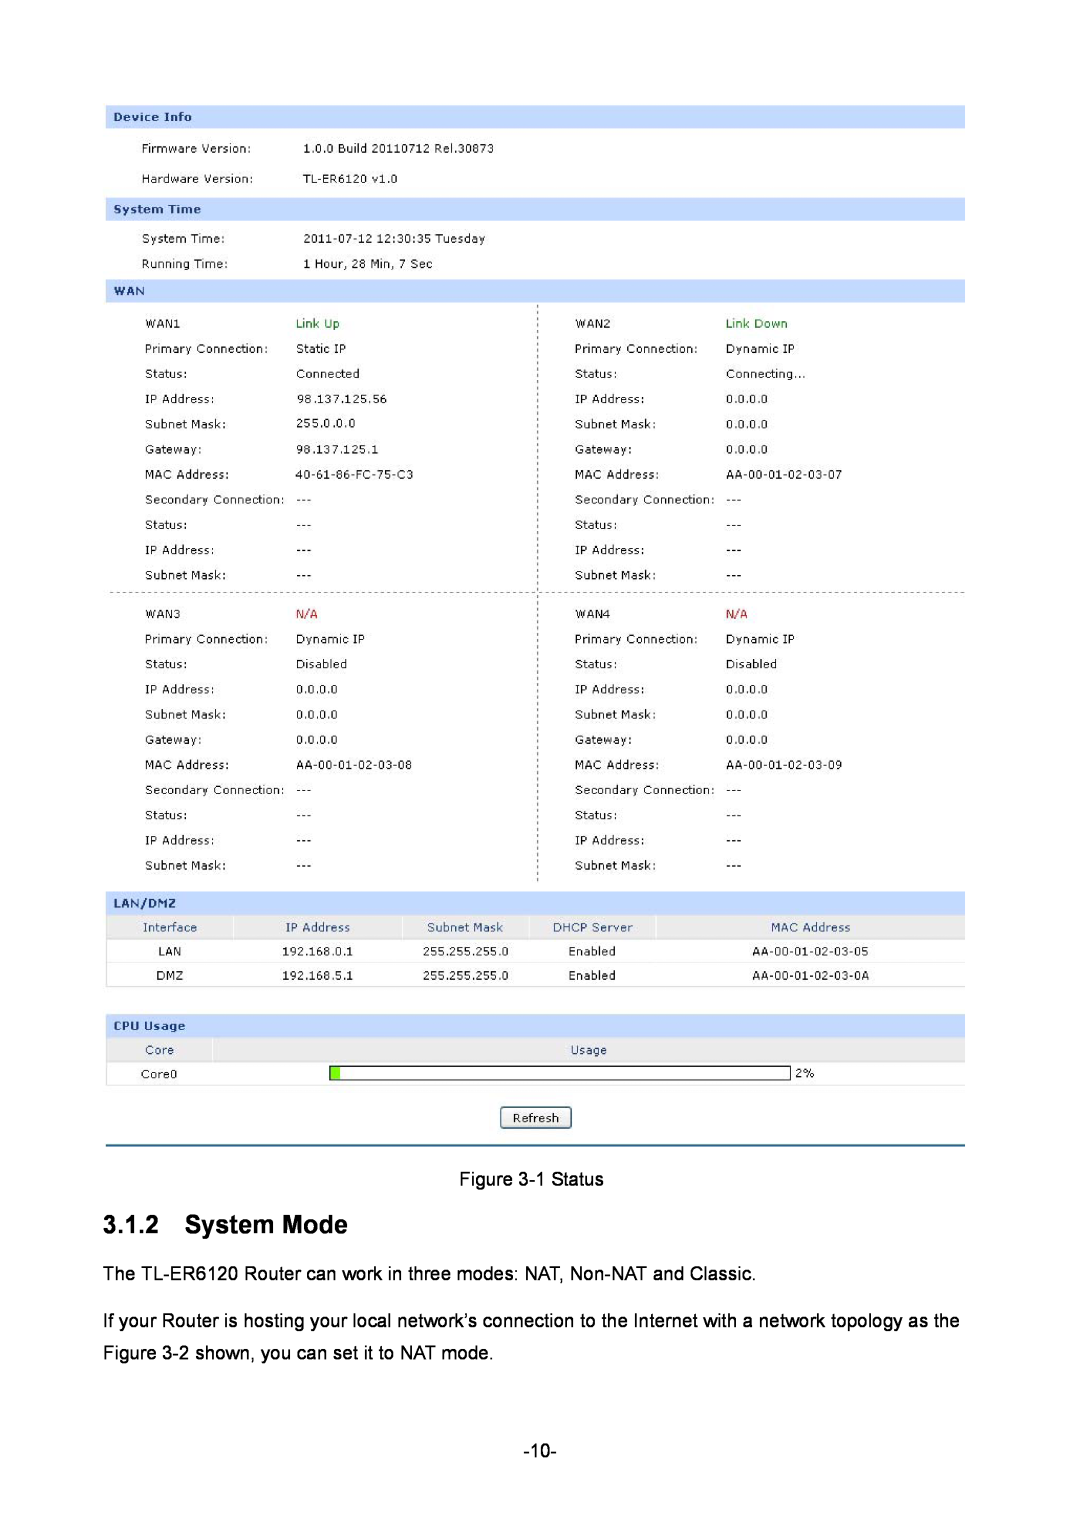 TP-Link manual System Mode, 1 Status, The TL-ER6120 Router can work in three modes NAT, Non-NAT and Classic 